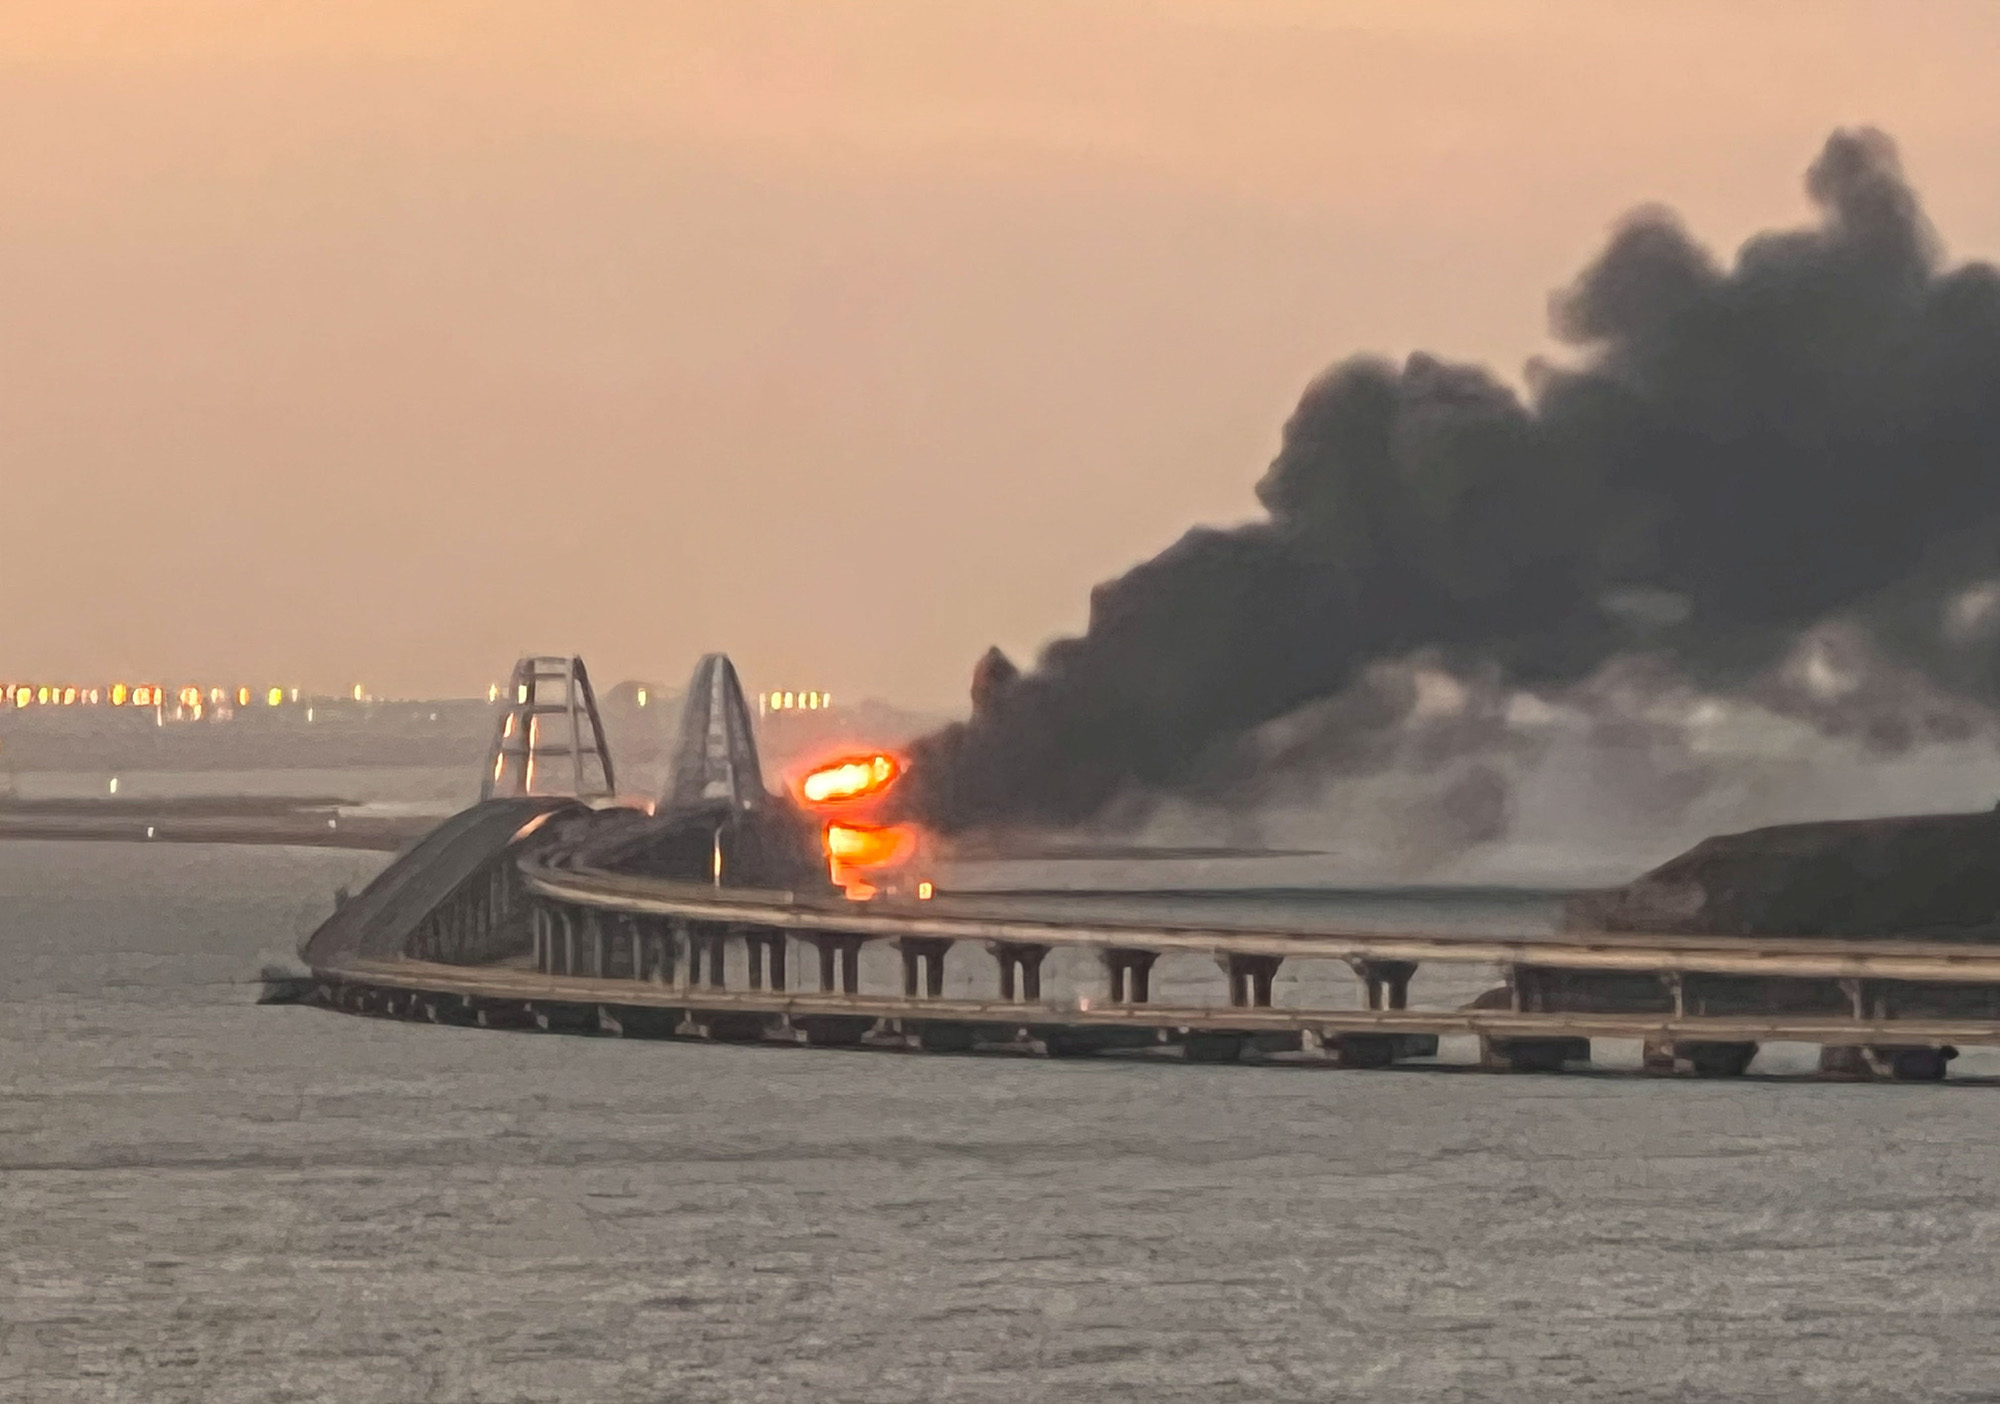 A fire burns on the Kerch bridge at sunrise in the Kerch Strait, Crimea on October 8.